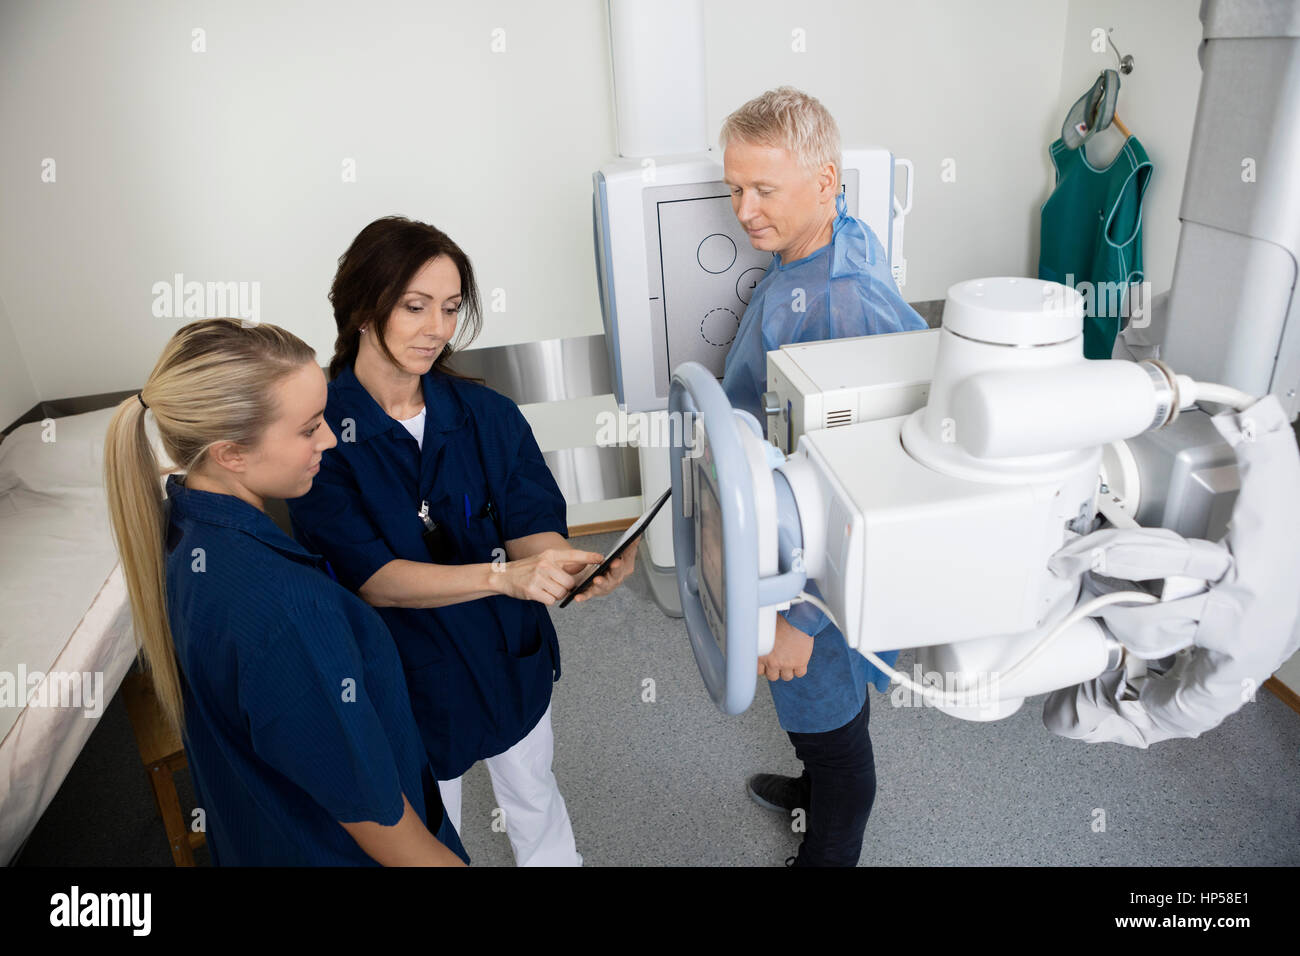 Patient Looking At Radiologists Using Digital Tablet In Hospital Stock Photo